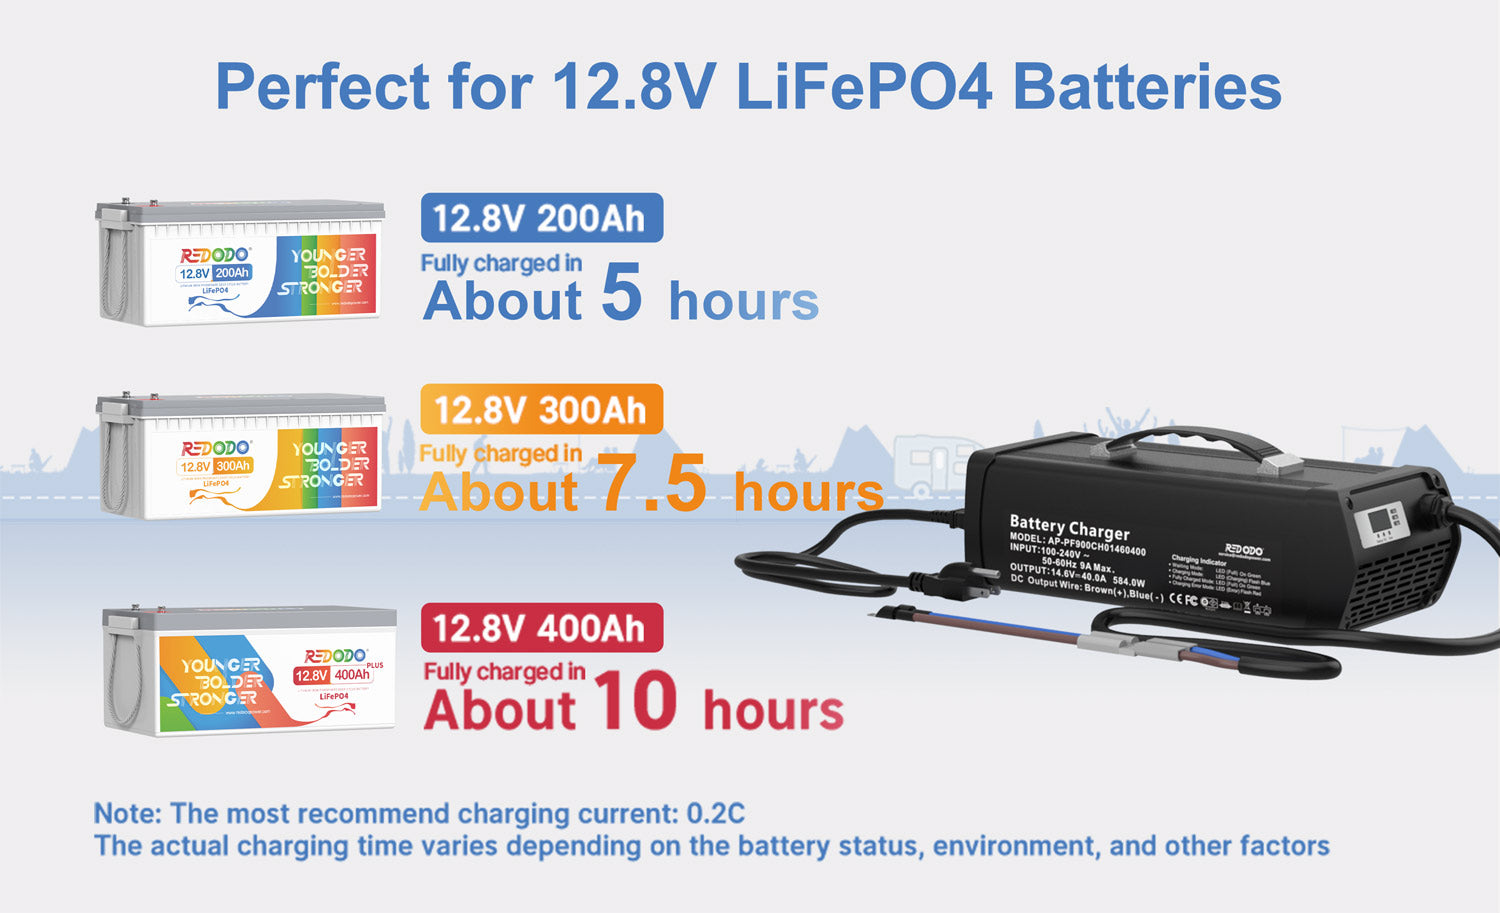 Redodo-14.6V-40A-lifepo4-battery-charger-fast-charging